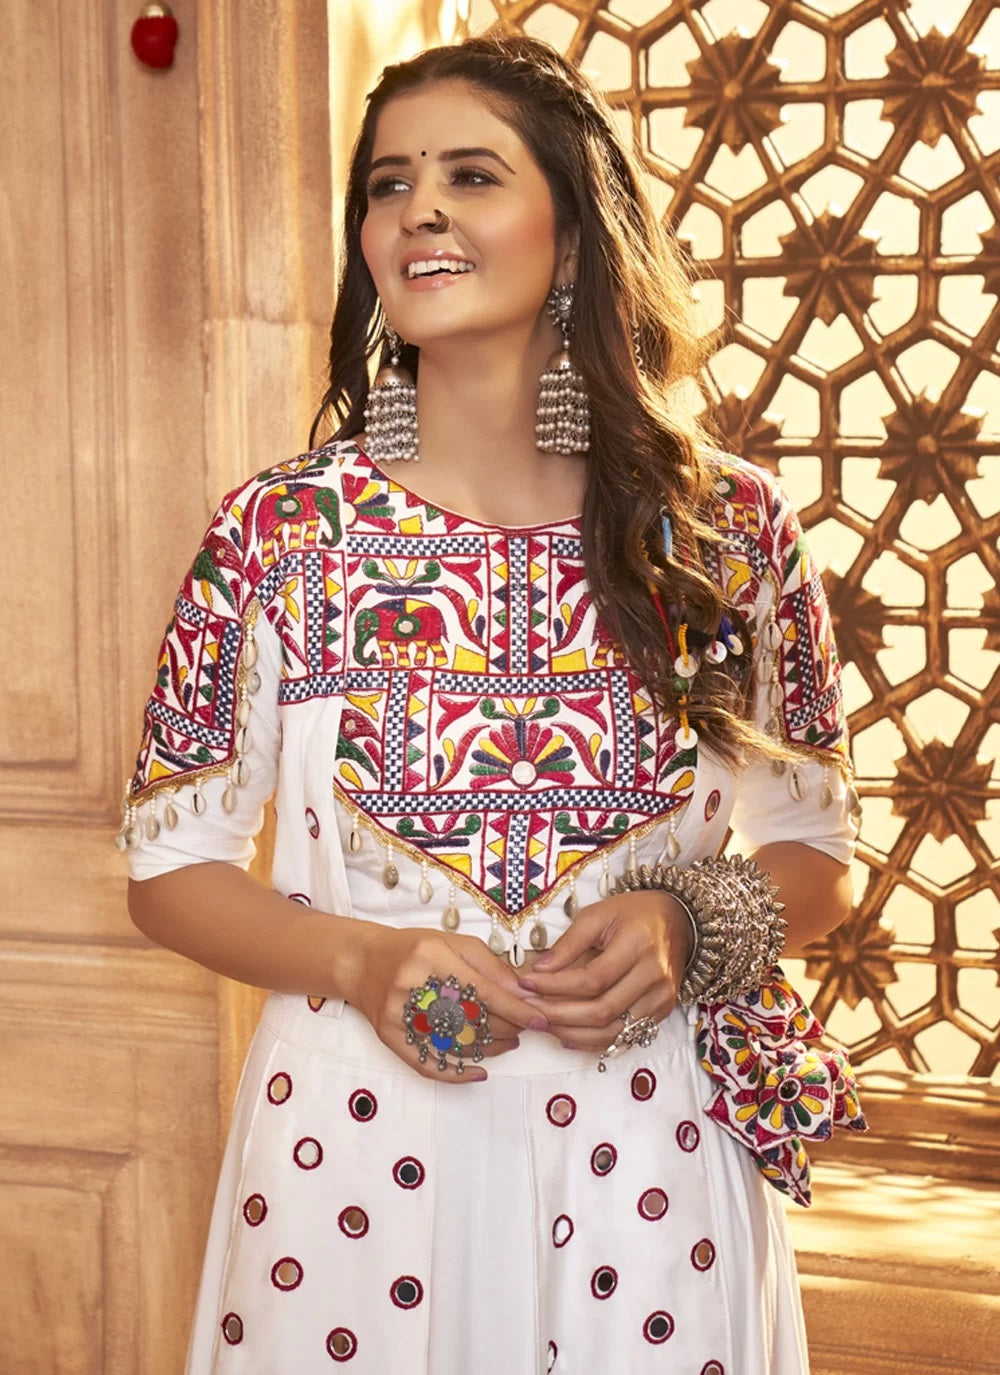 Buy Off-White Mirror Work Cotton A-Line Kurti With Palazzos Online at  Rs.1559 | Libas